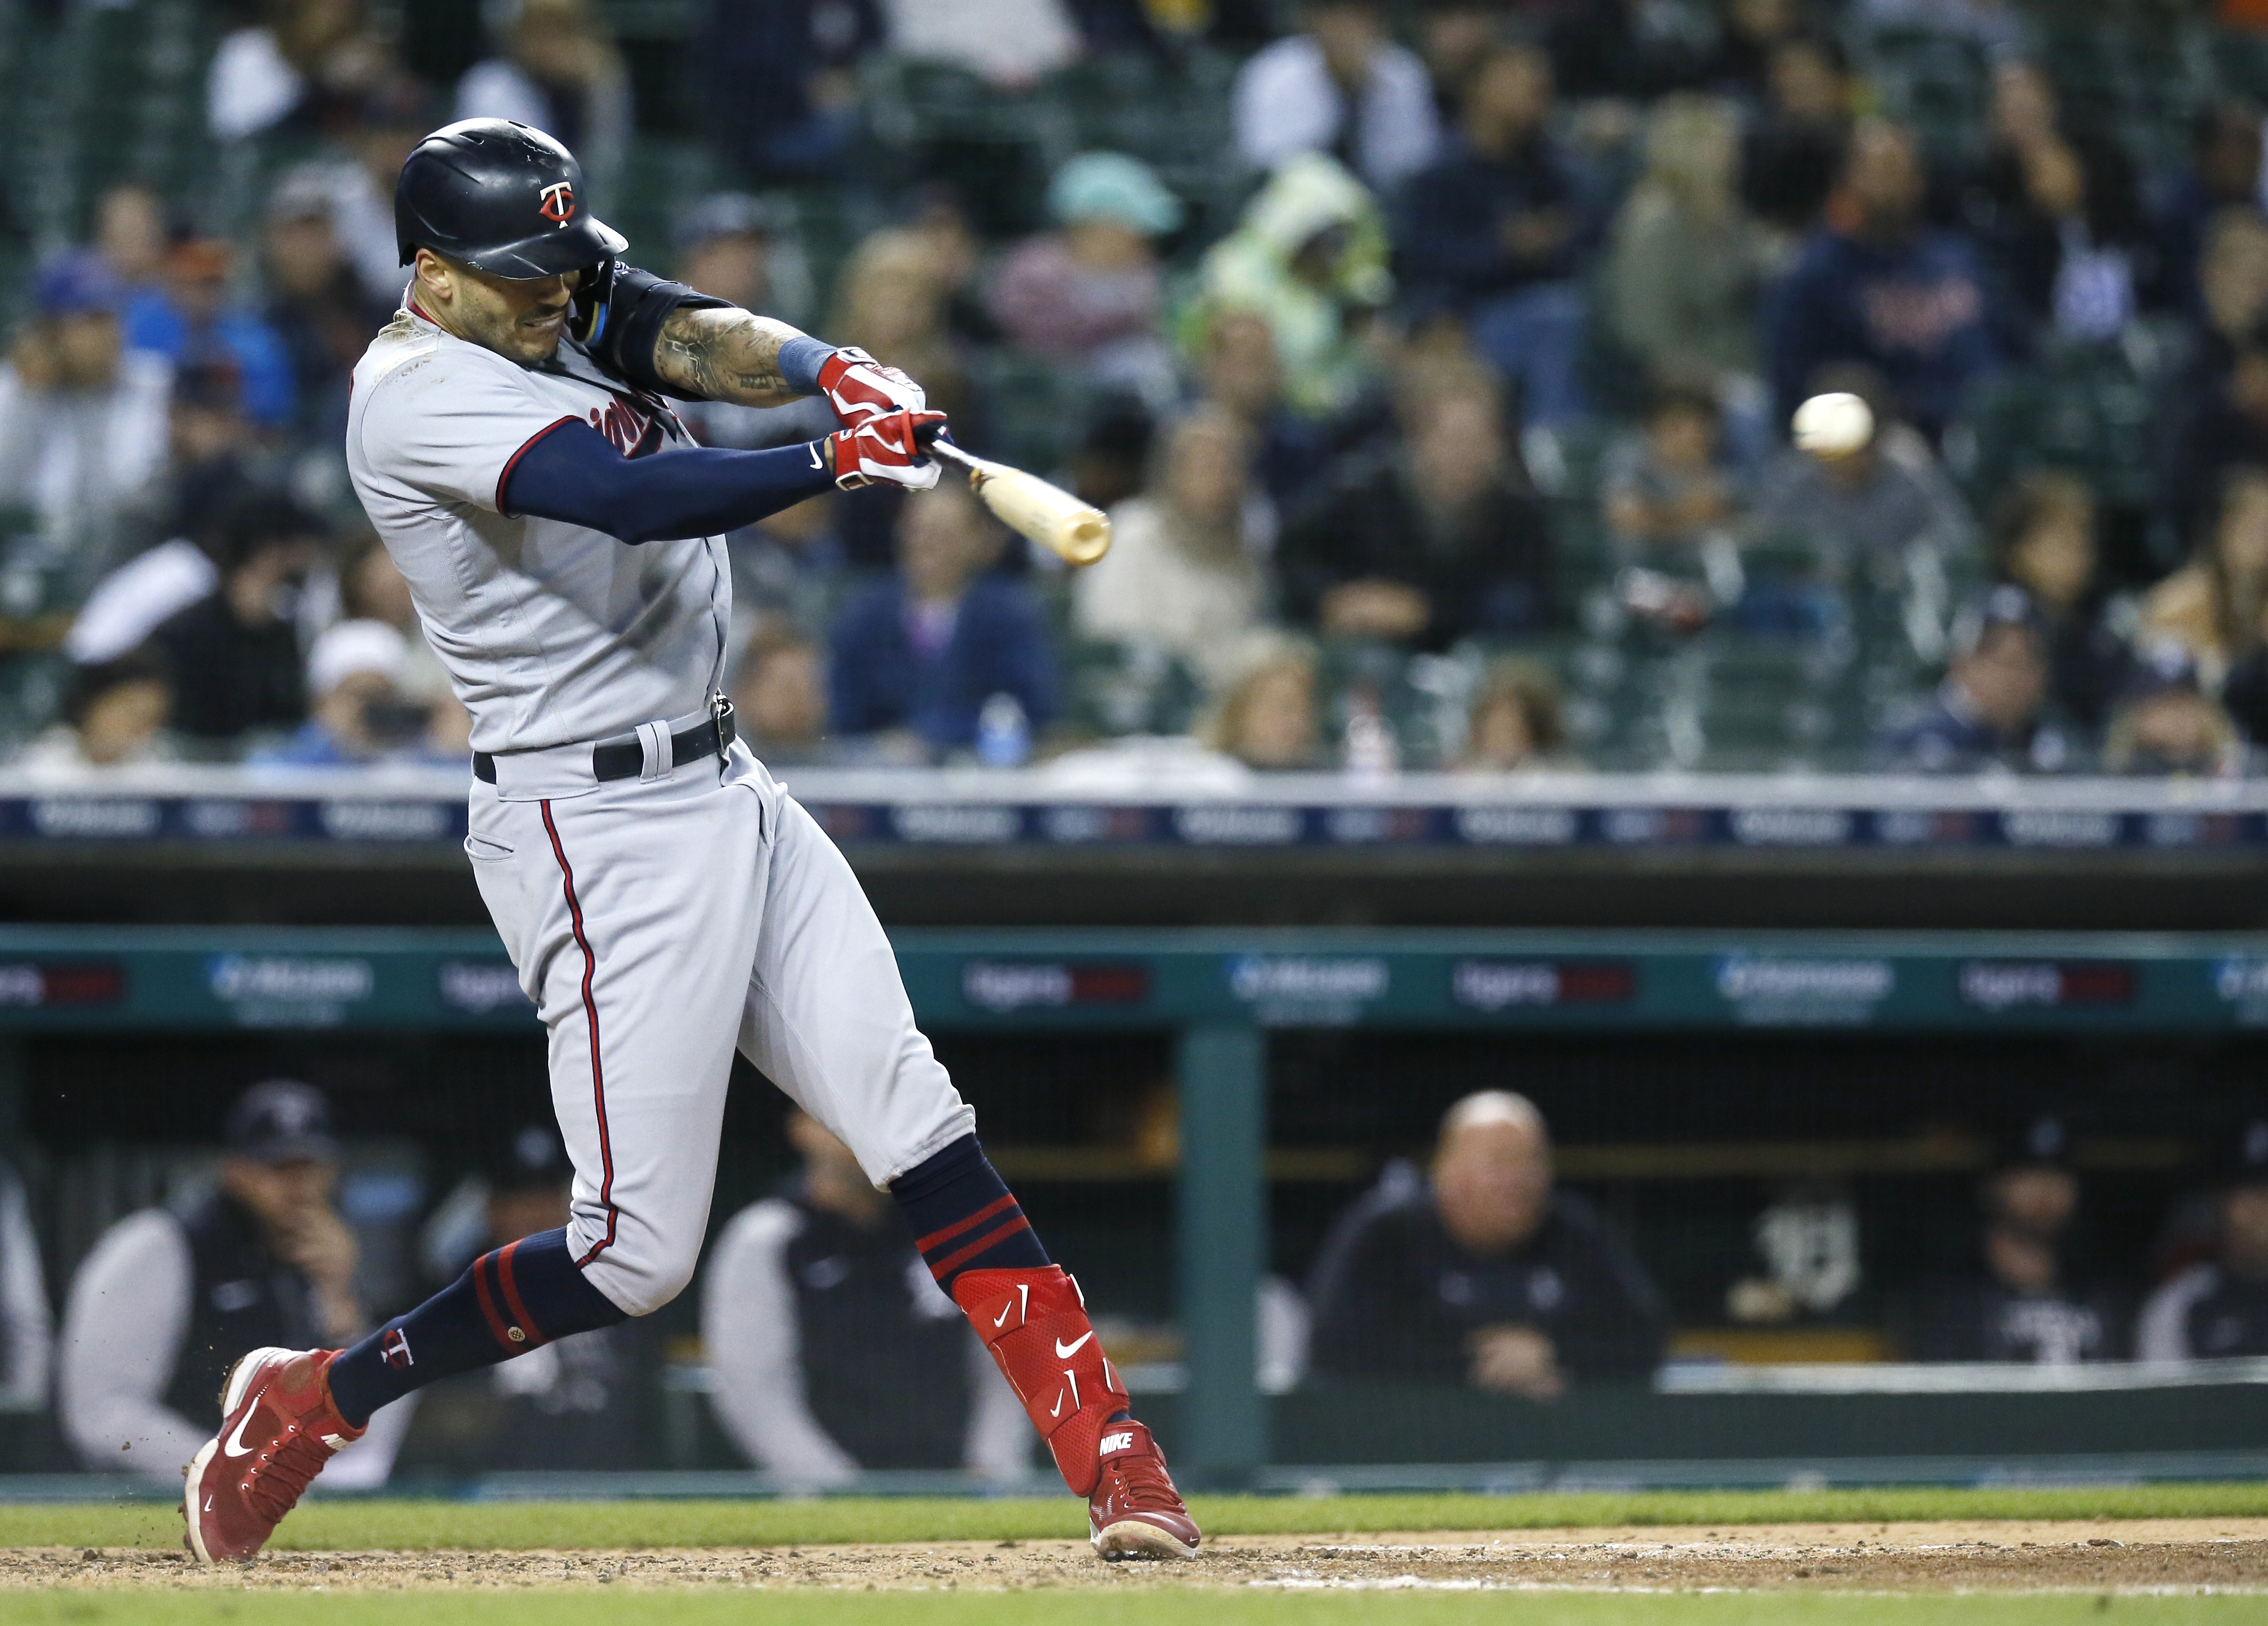 Shortstop Carlos Correa of the Minnesota Twins hits during the fifth inning in the game against the Detroit Tigers at Comerica Park in Detroit, Michigan, U.S., September 30, 2022. /CFP